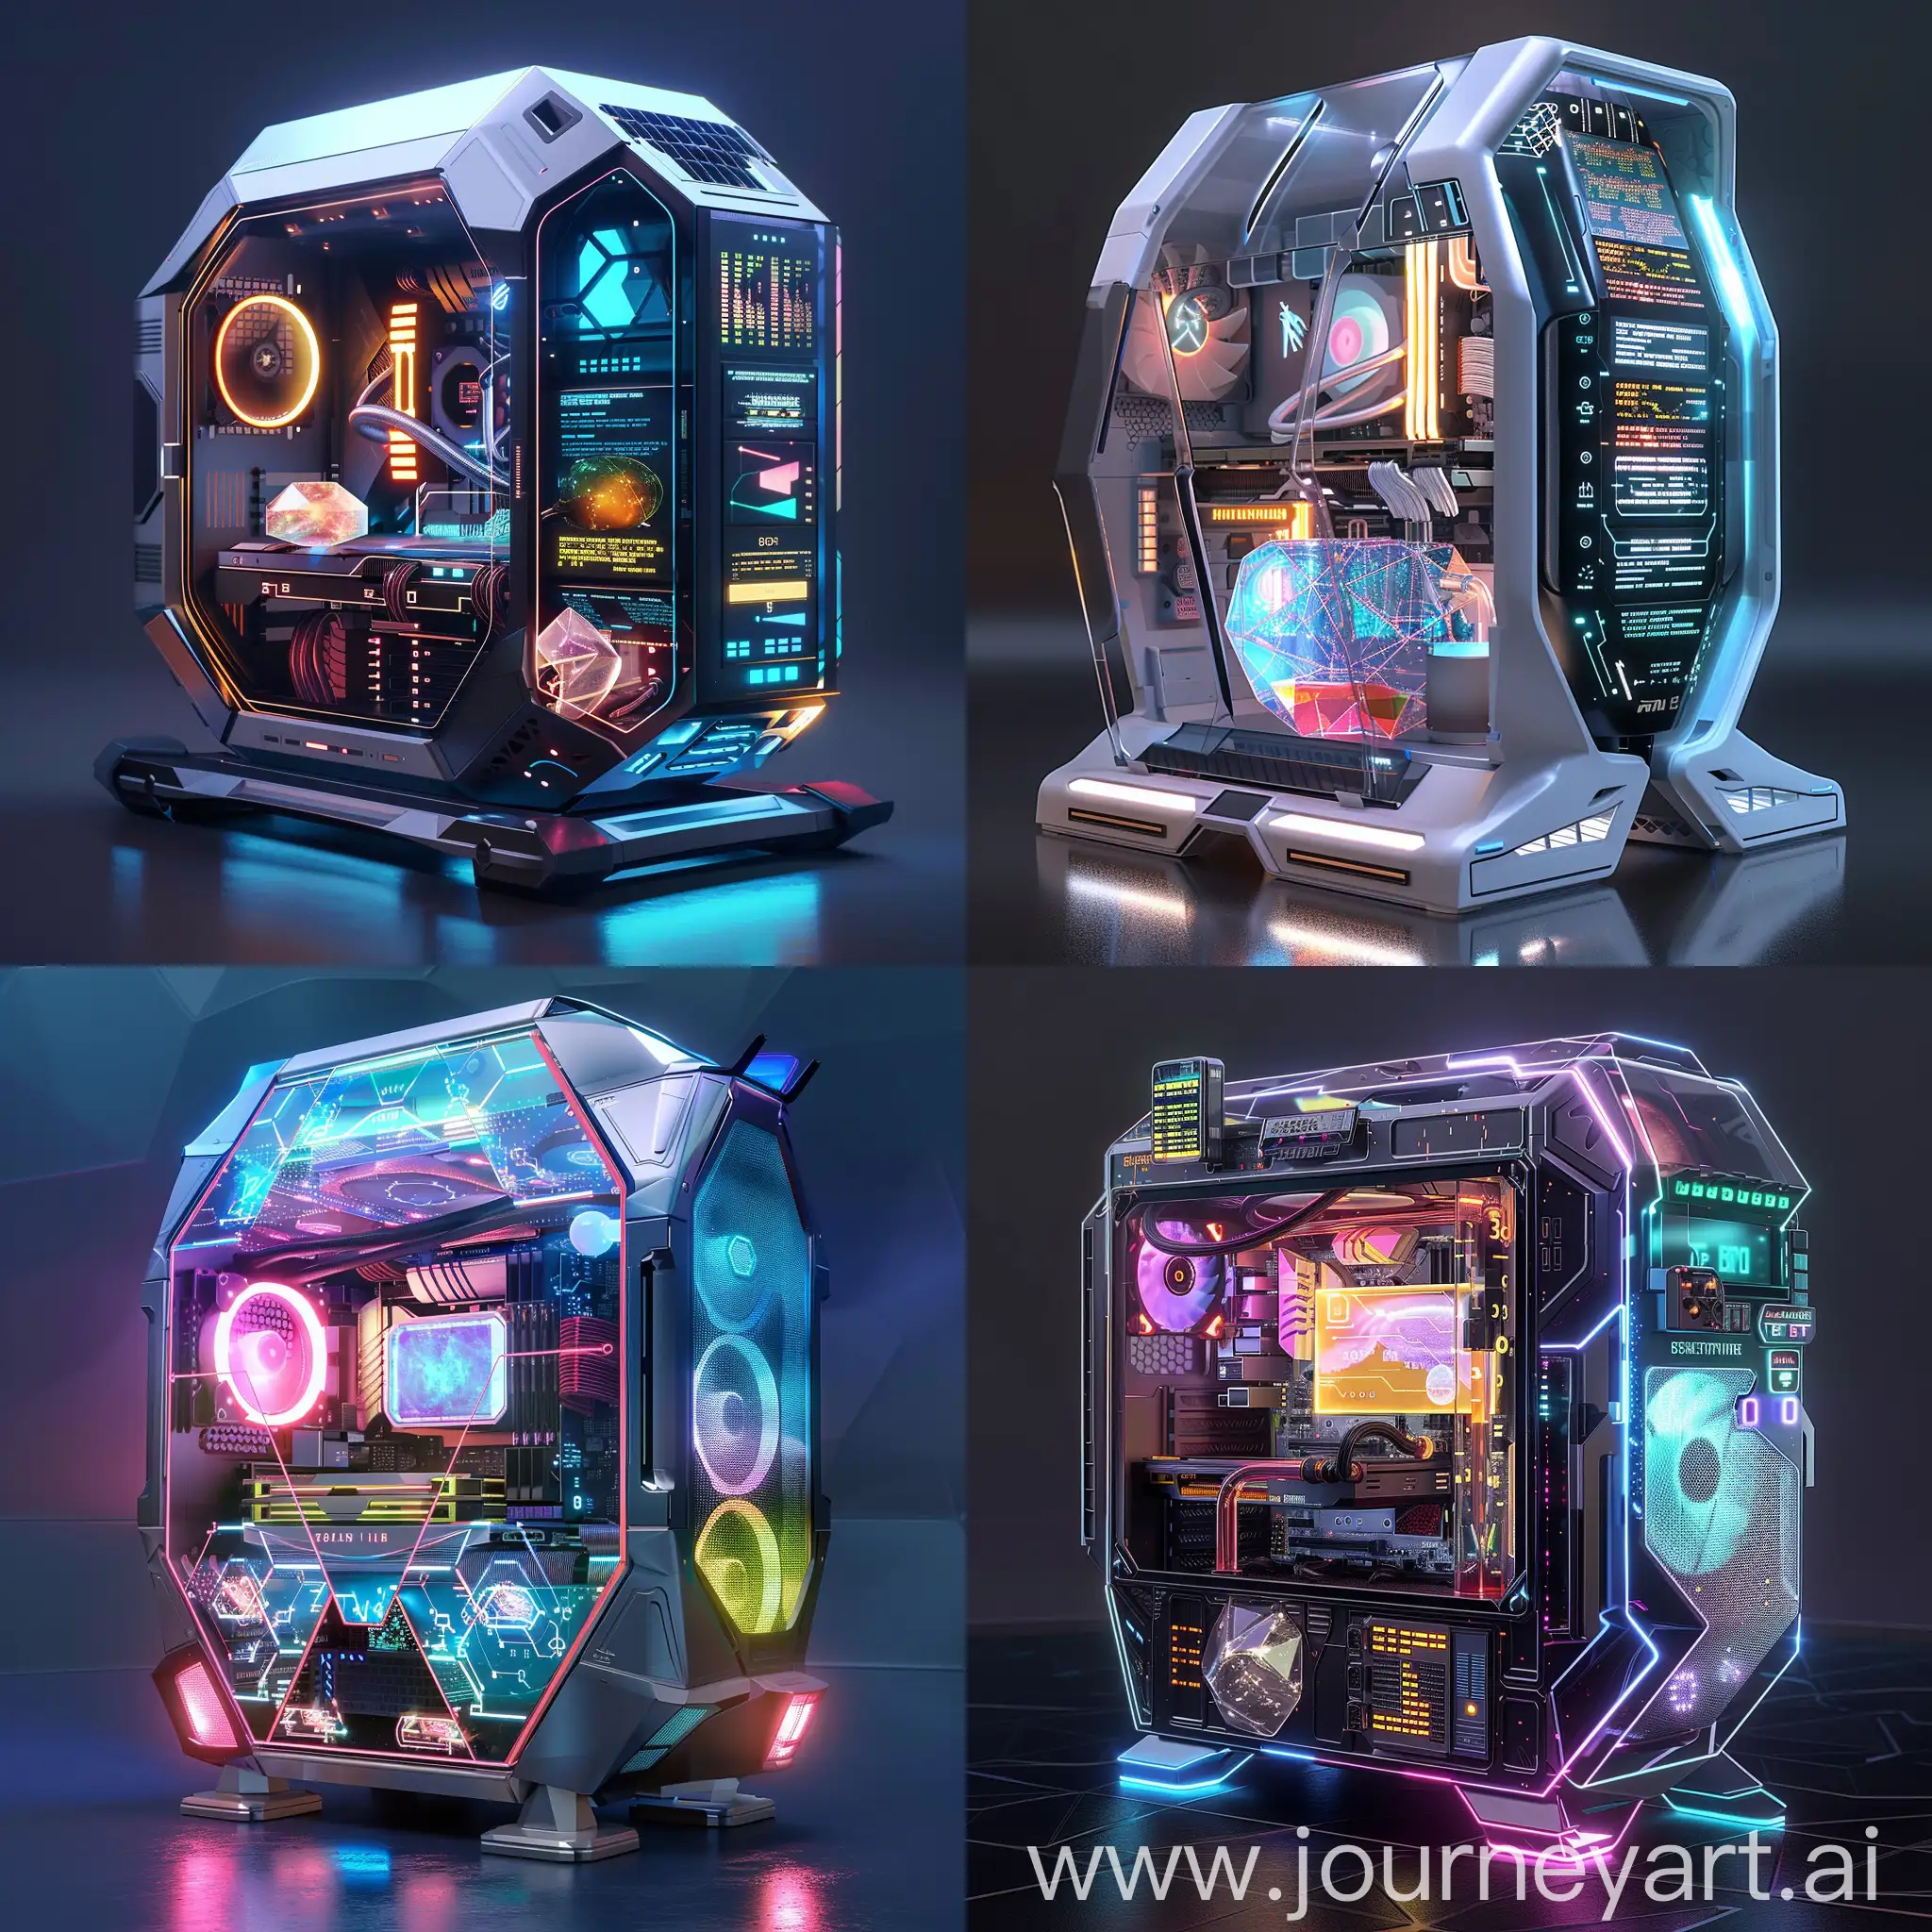 Futuristic-PC-Case-with-Modular-Architecture-and-Holographic-Interface